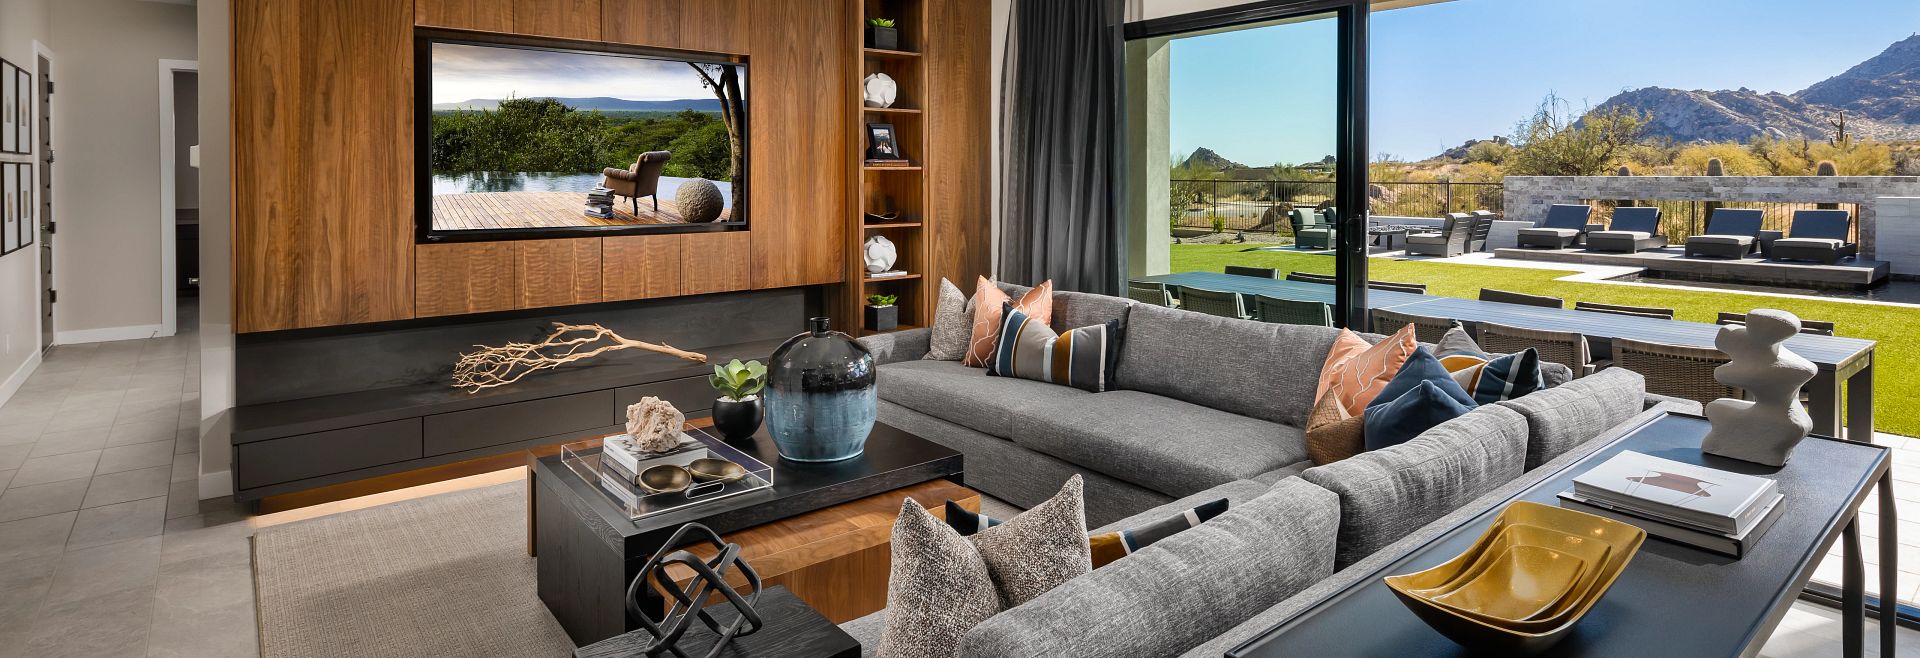 Living area in Prelude at Storyrock plan 7524